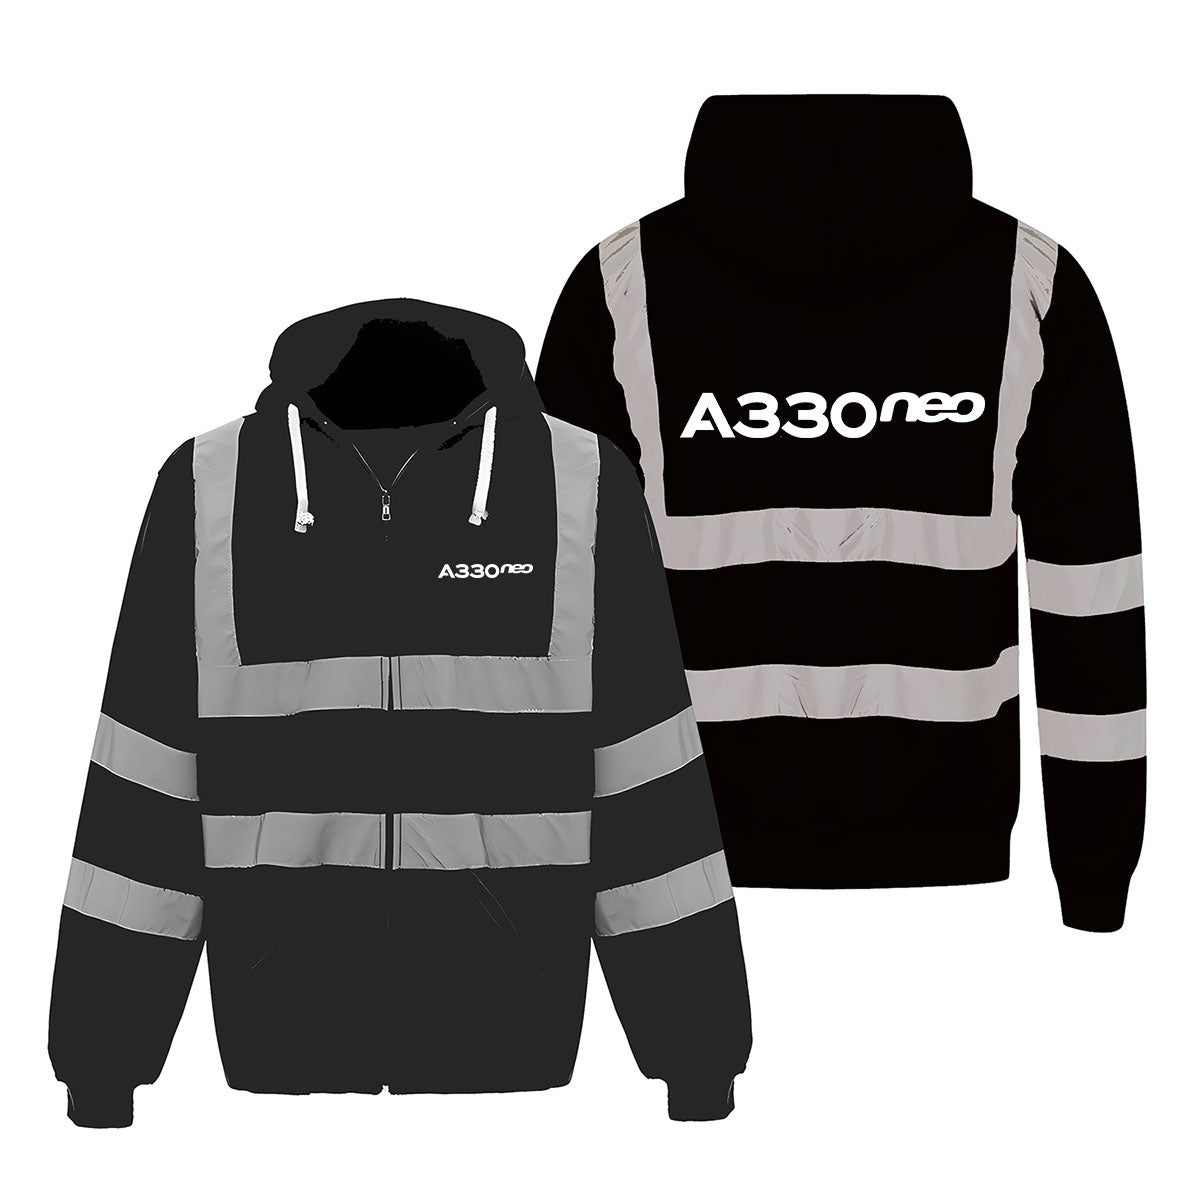 A330neo & Text Designed Reflective Zipped Hoodies